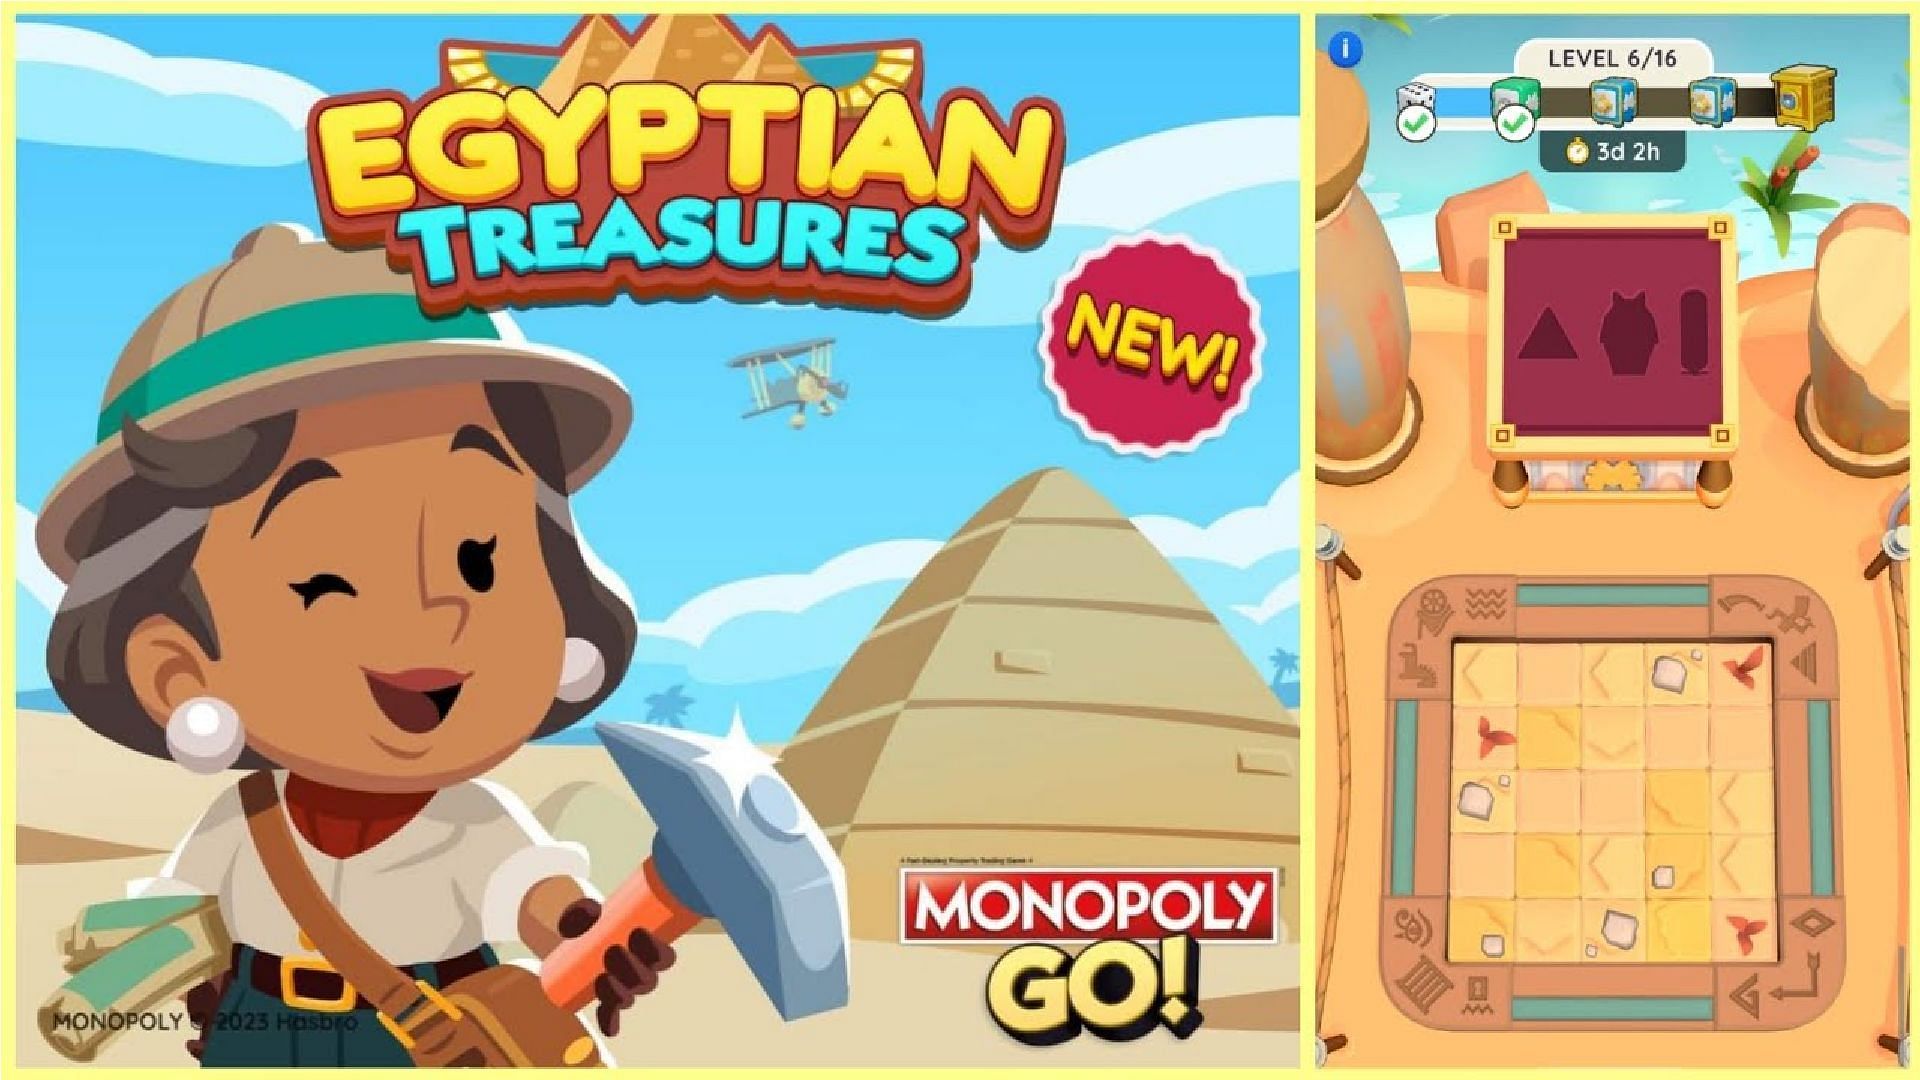 Dig up the artifacts to complete milestones and get rewards from the Egyptian Treasure tournament in Monopoly Go (Image via Scopely)